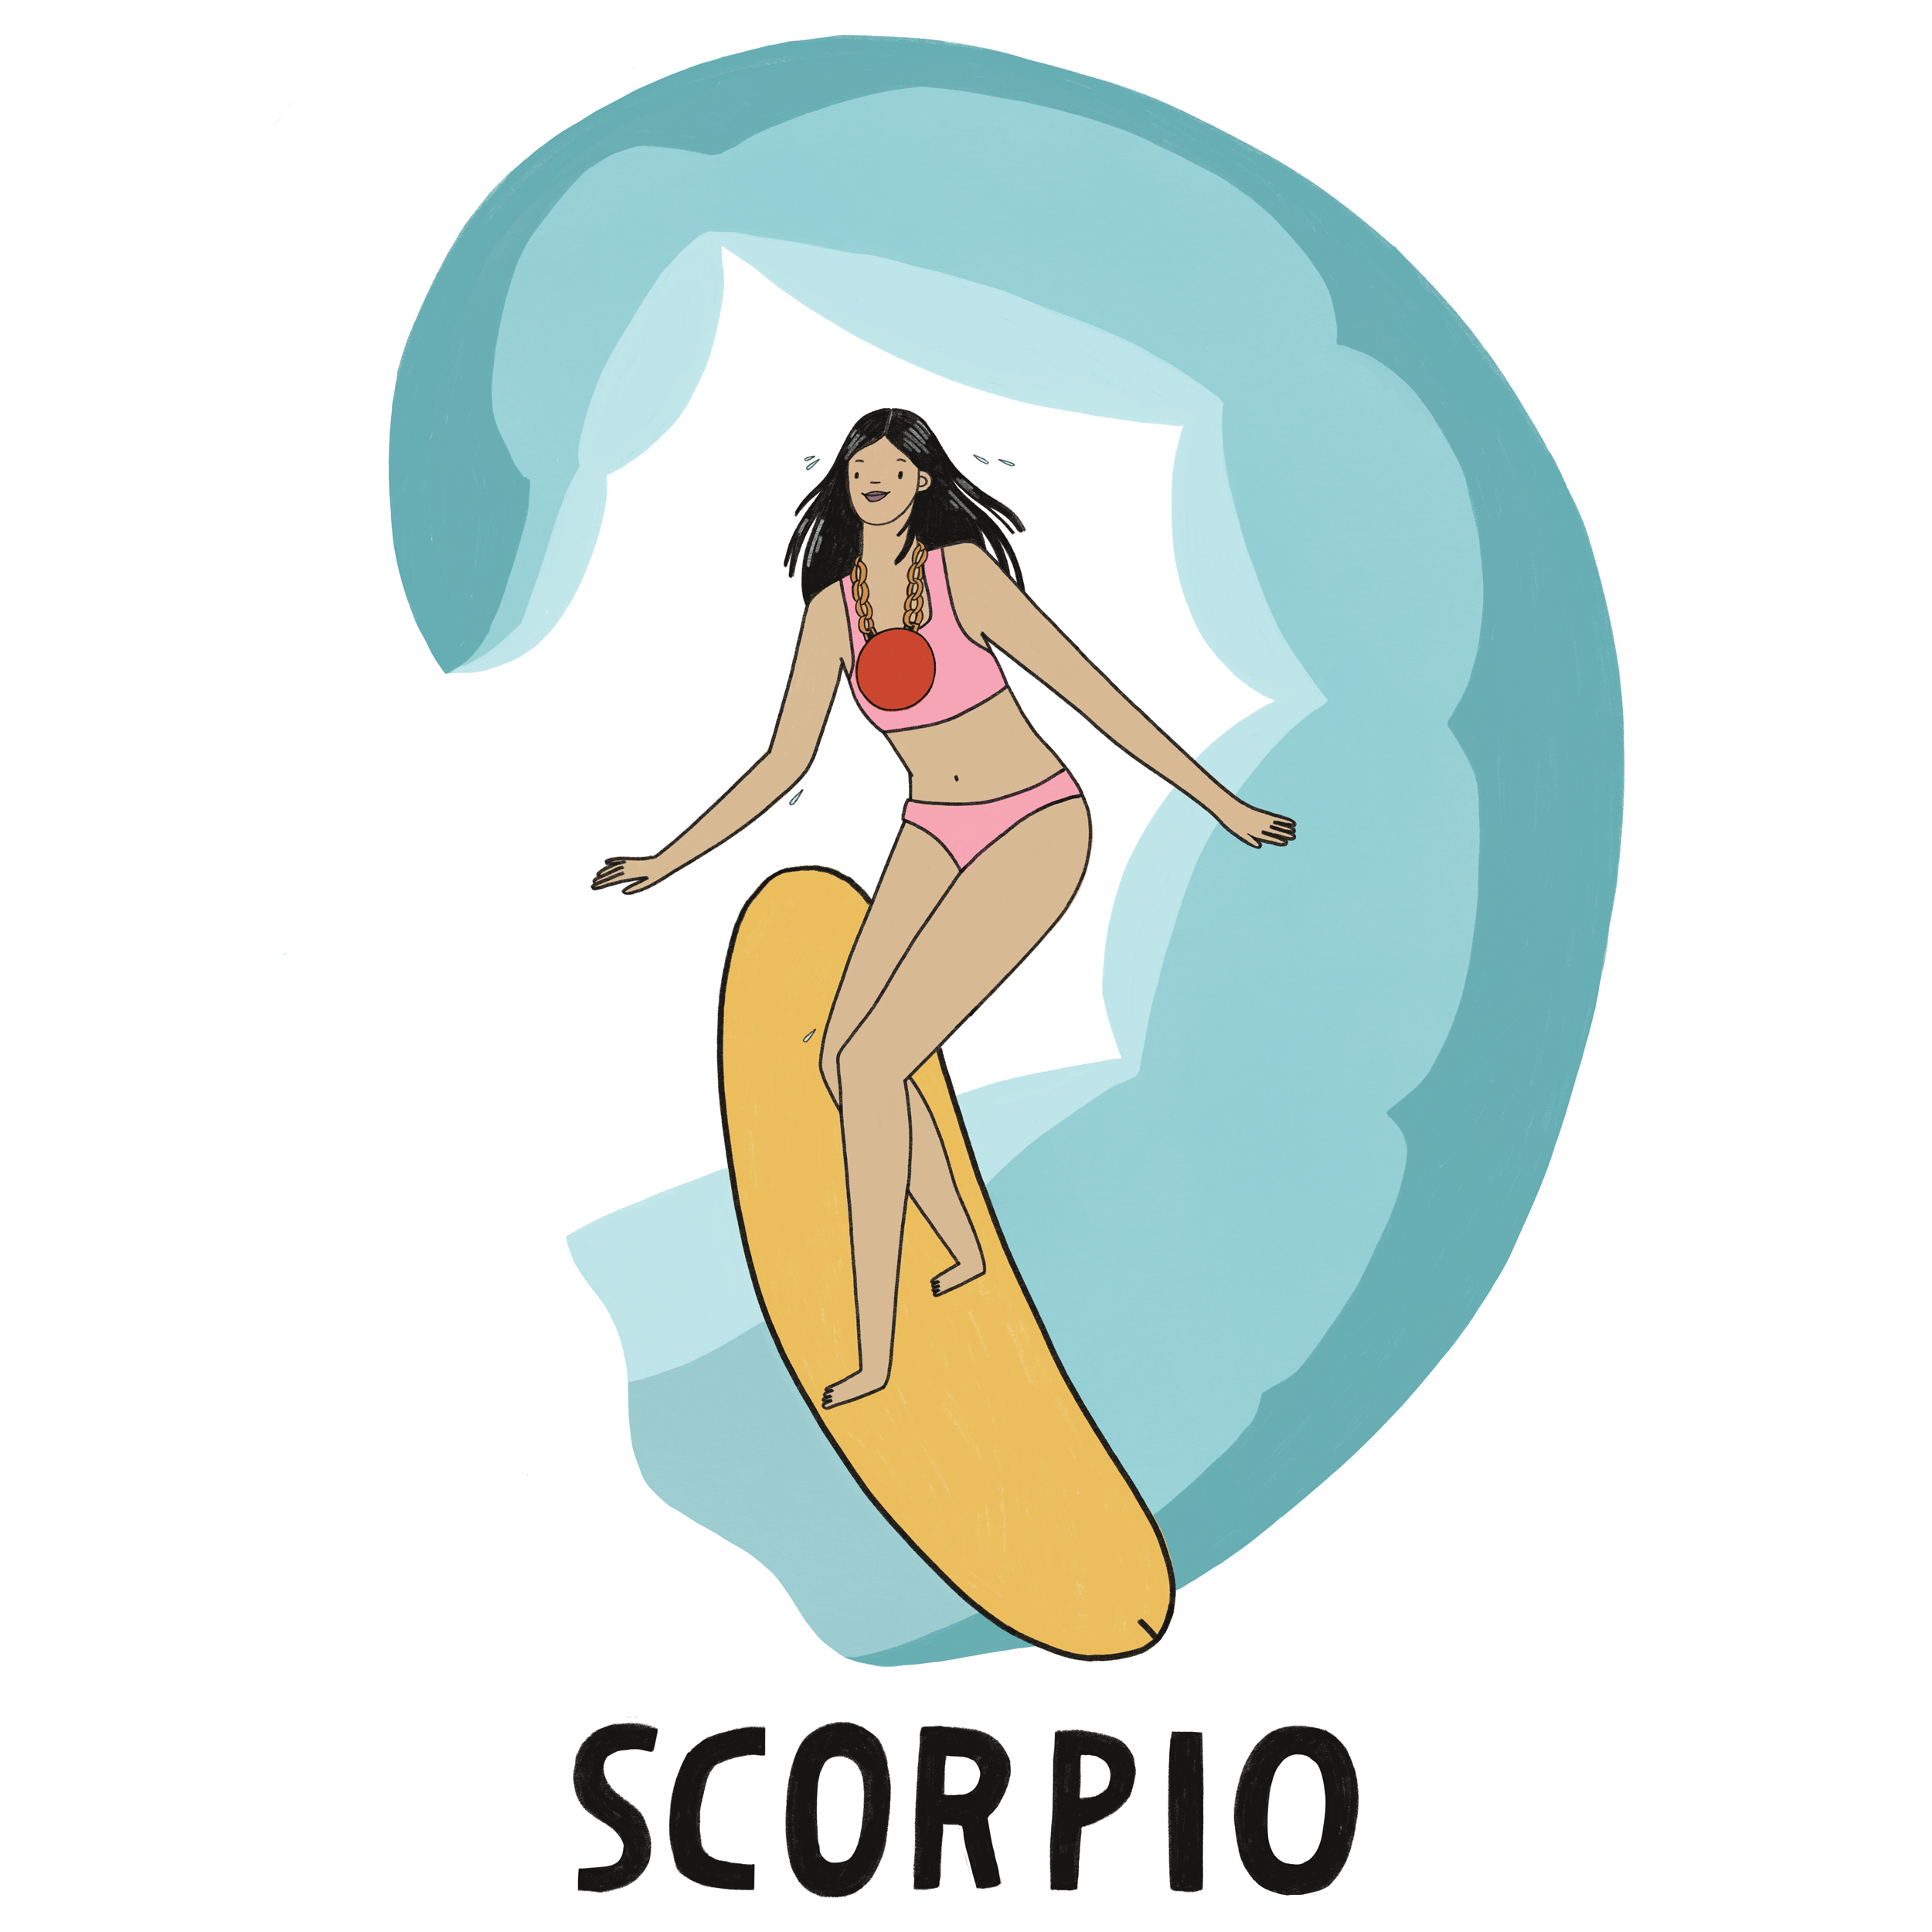 A graphic illustrating the personality of the Scorpio zodiac sign.  